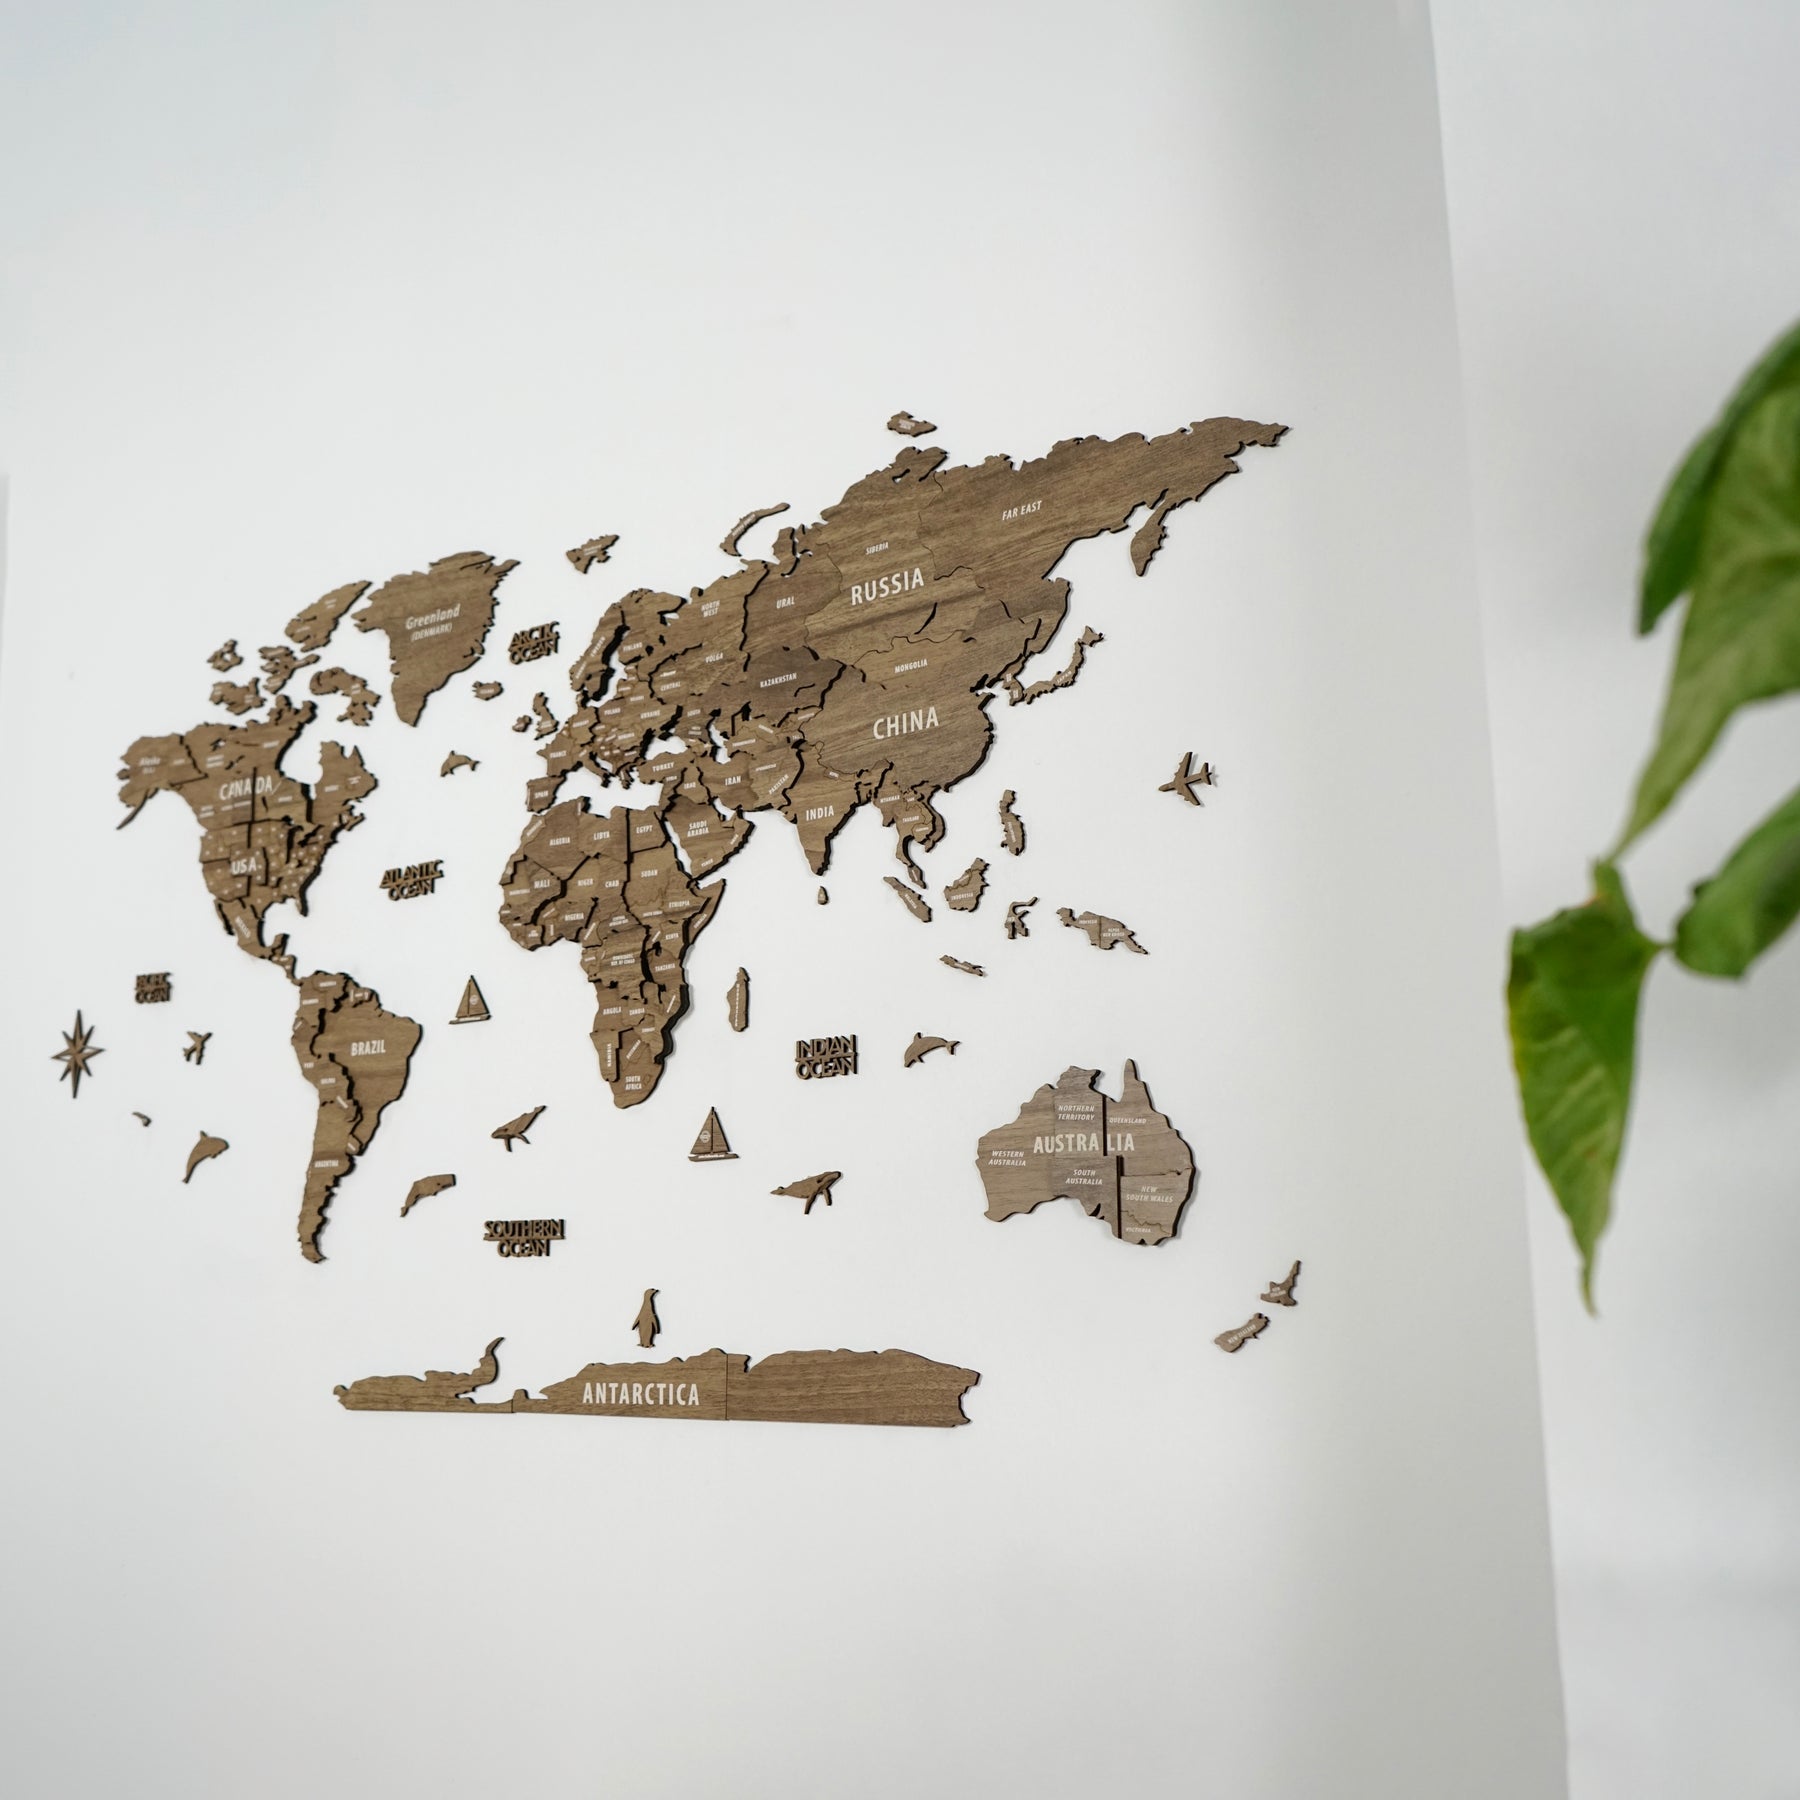 3D Wooden Multilayered World Map with States and Capitals v2 Betul ...